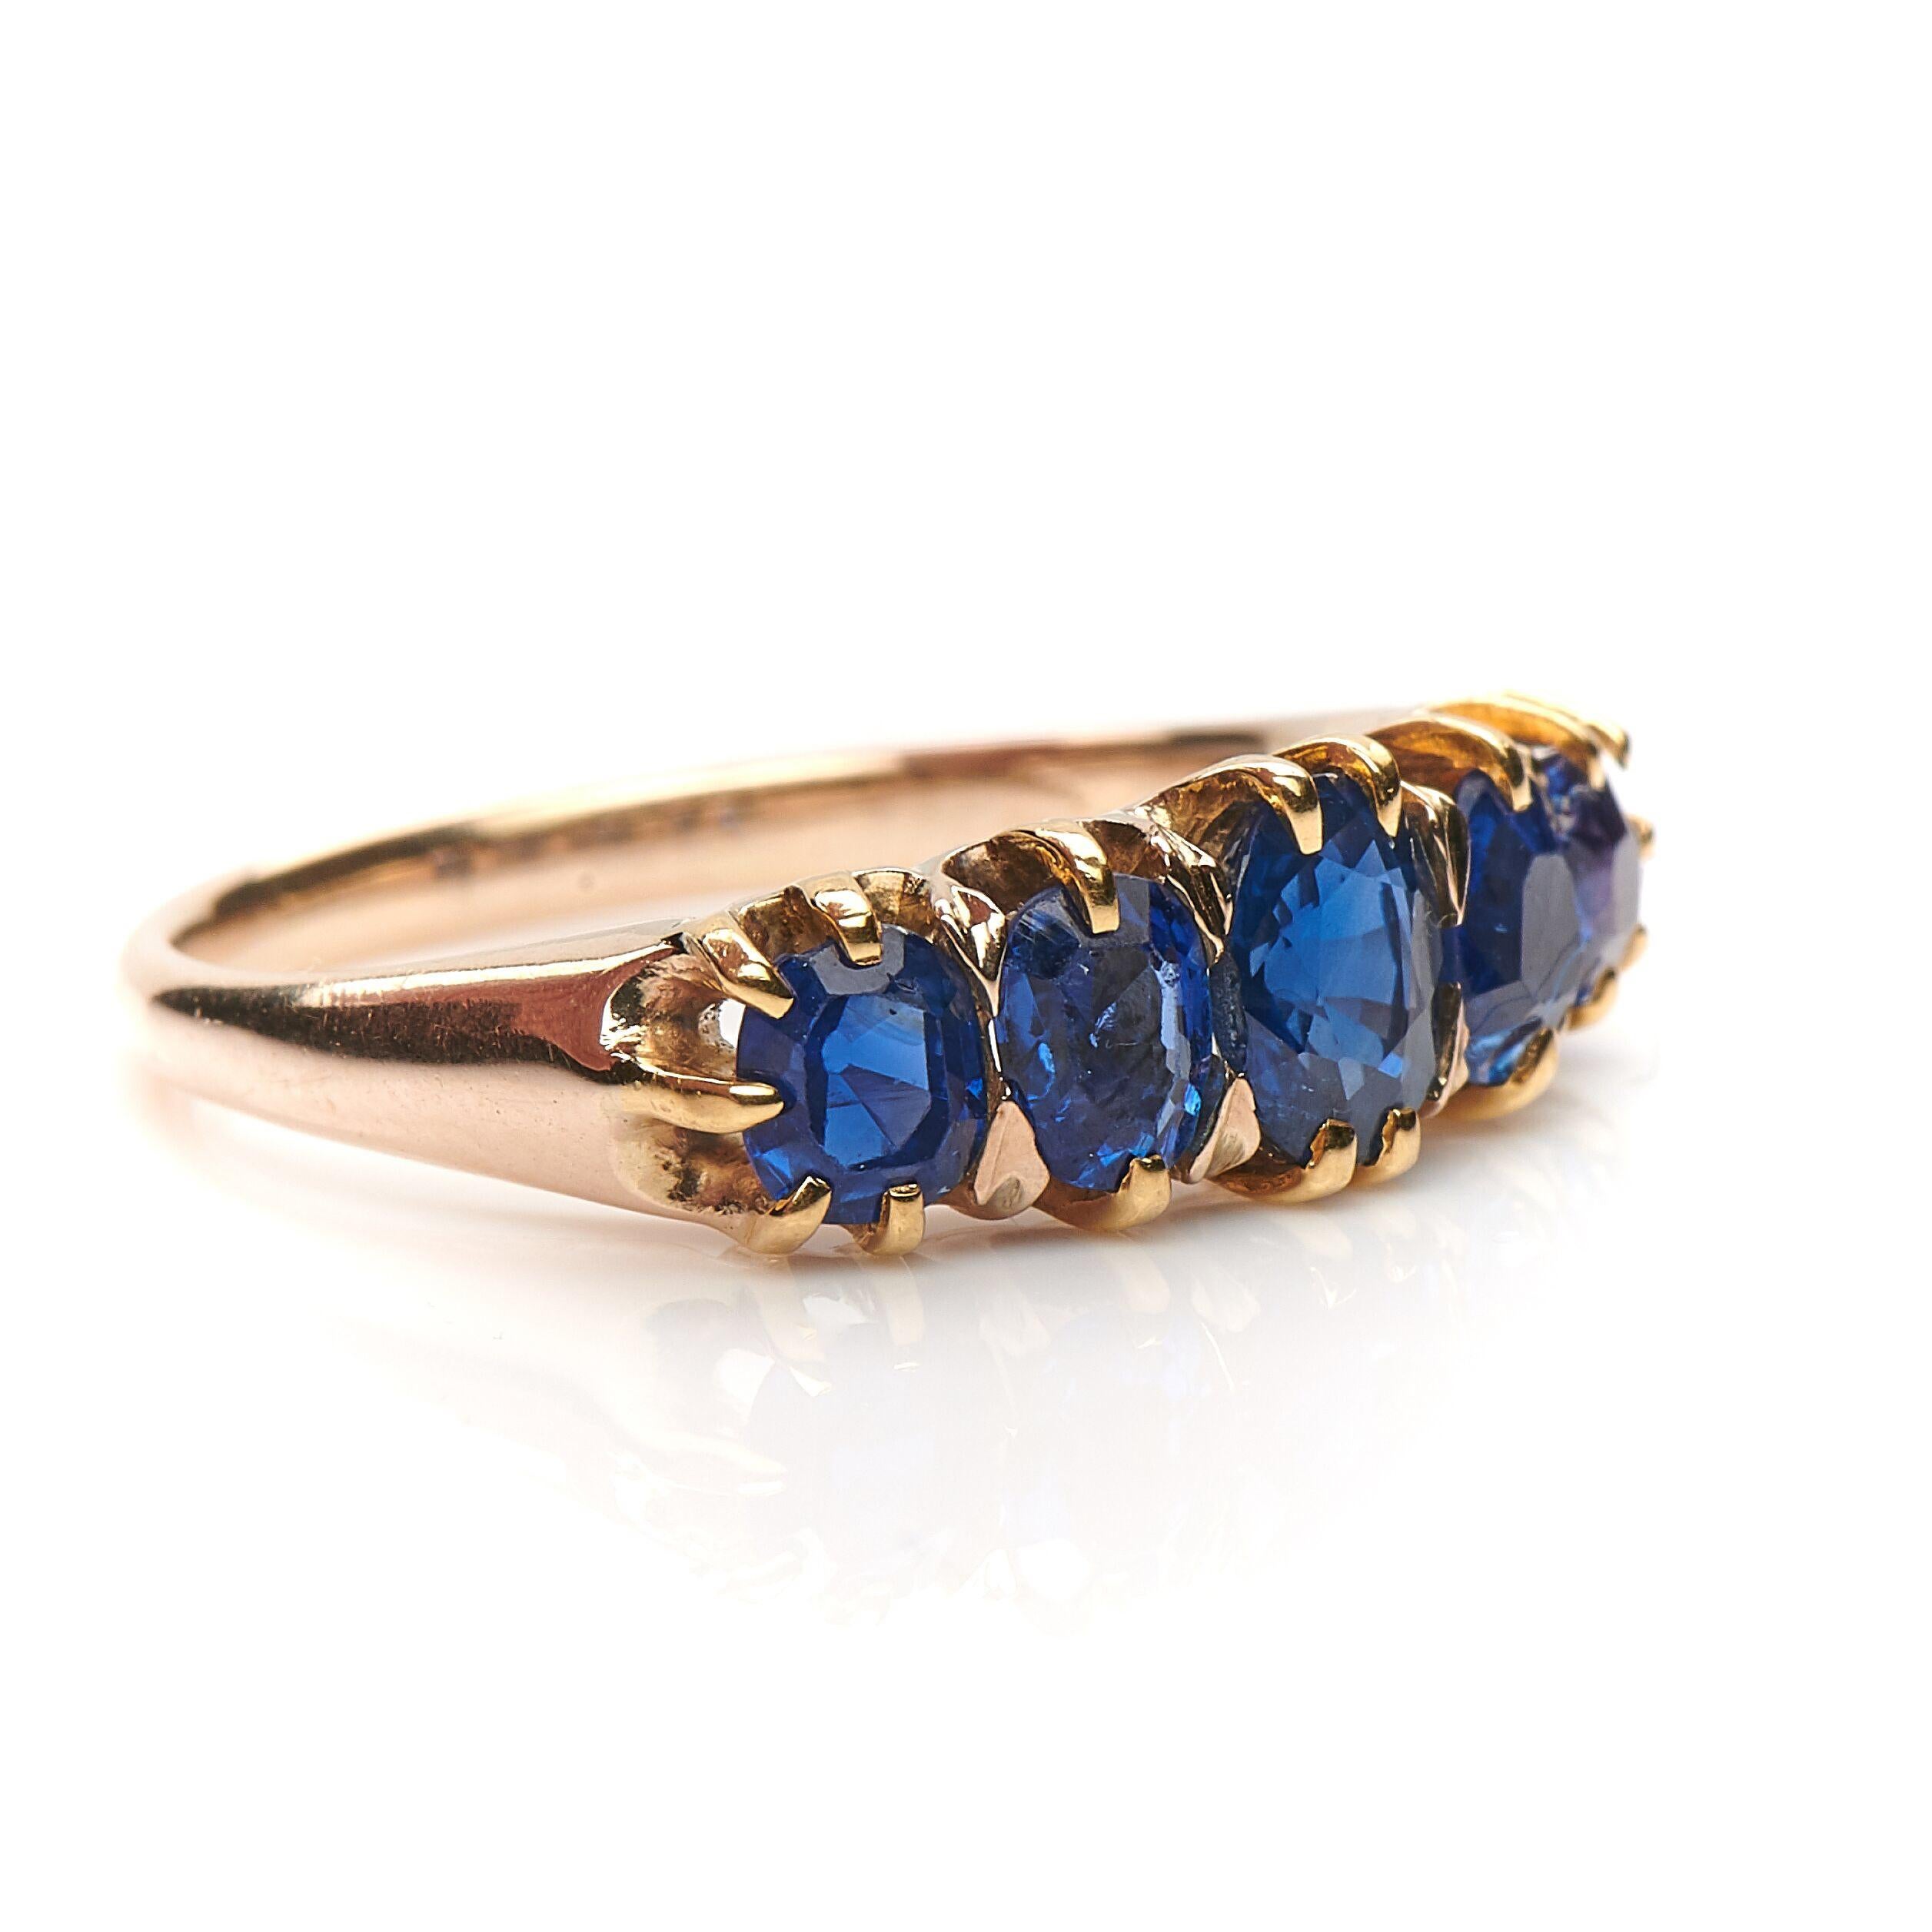 Victorian, sapphire five stone ring, circa 1890. Horizontally set with five old cushion shape sapphires in a simple 18ct yellow gold claw setting. The sapphires are a wonderful mid-blue colour with a lots of character and life. The unadulterated